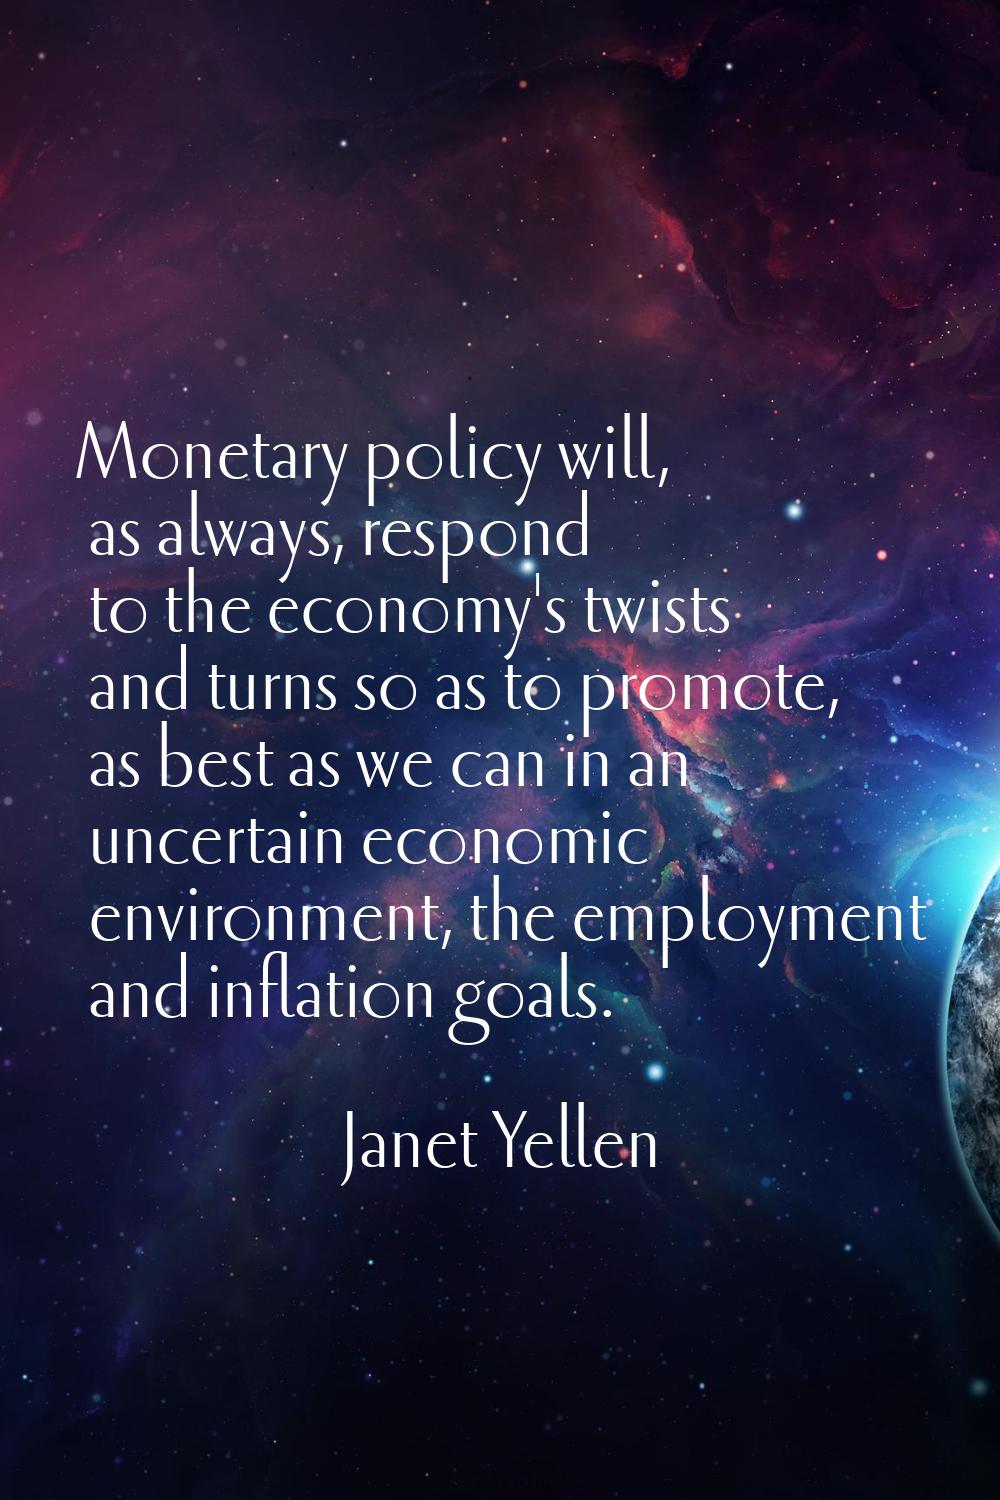 Monetary policy will, as always, respond to the economy's twists and turns so as to promote, as bes